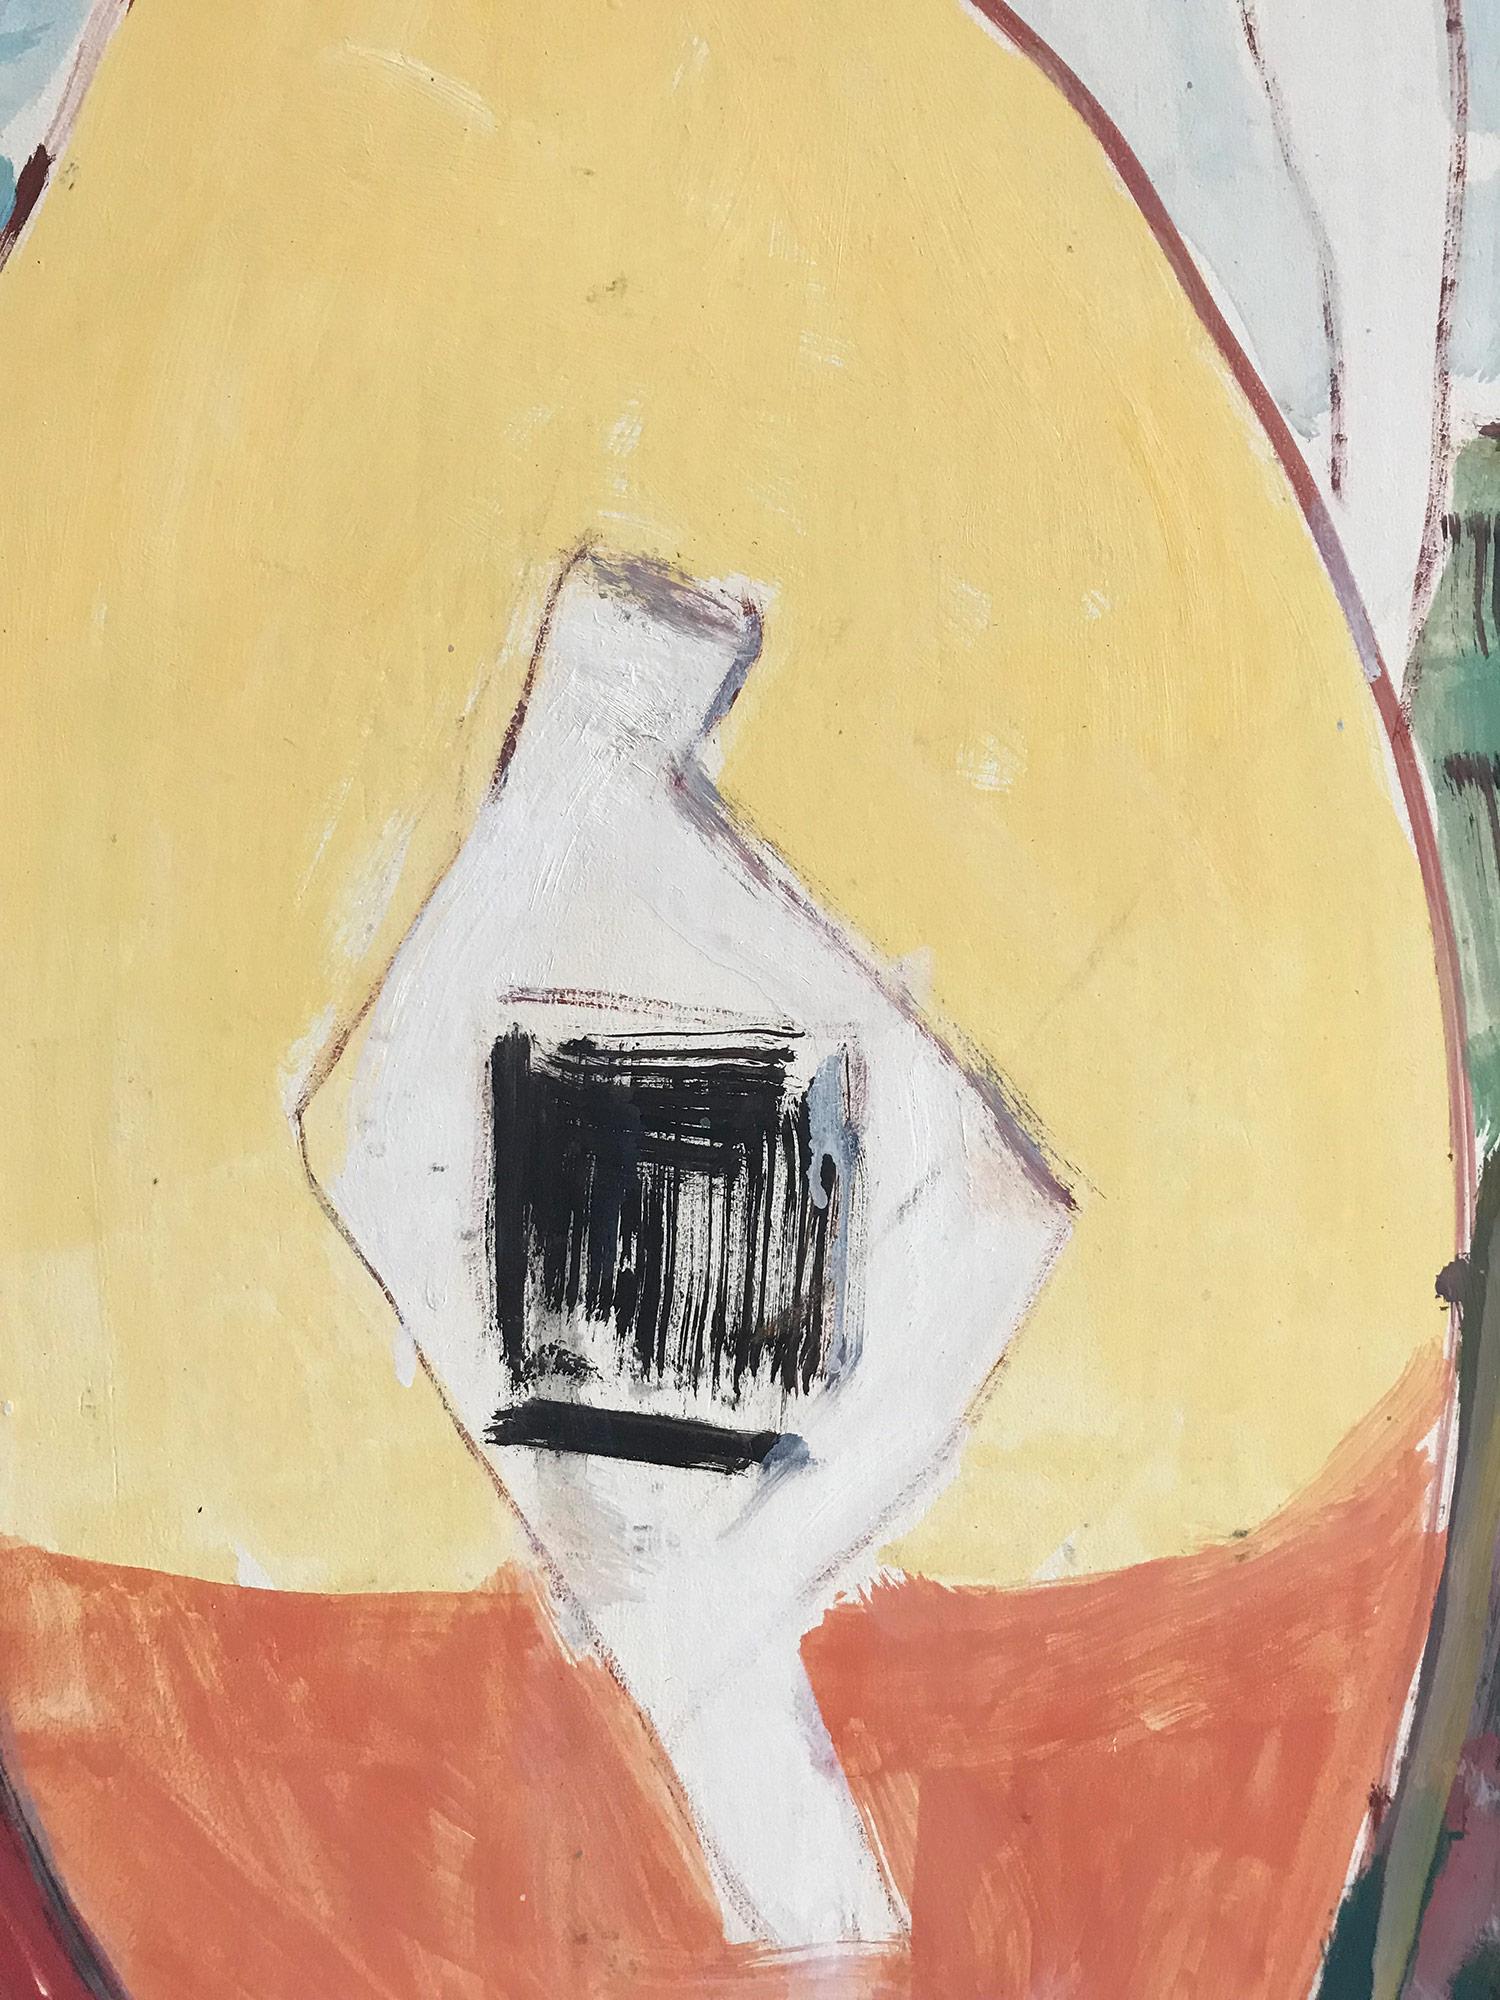 A strong modernist oil painting depicted in 1971 by Russian painter Michael Baxte. Mostly known for his abstracted figures on canvas or street scenes, this piece is a wonderful representation of his bold still life paintings, with expressive use of